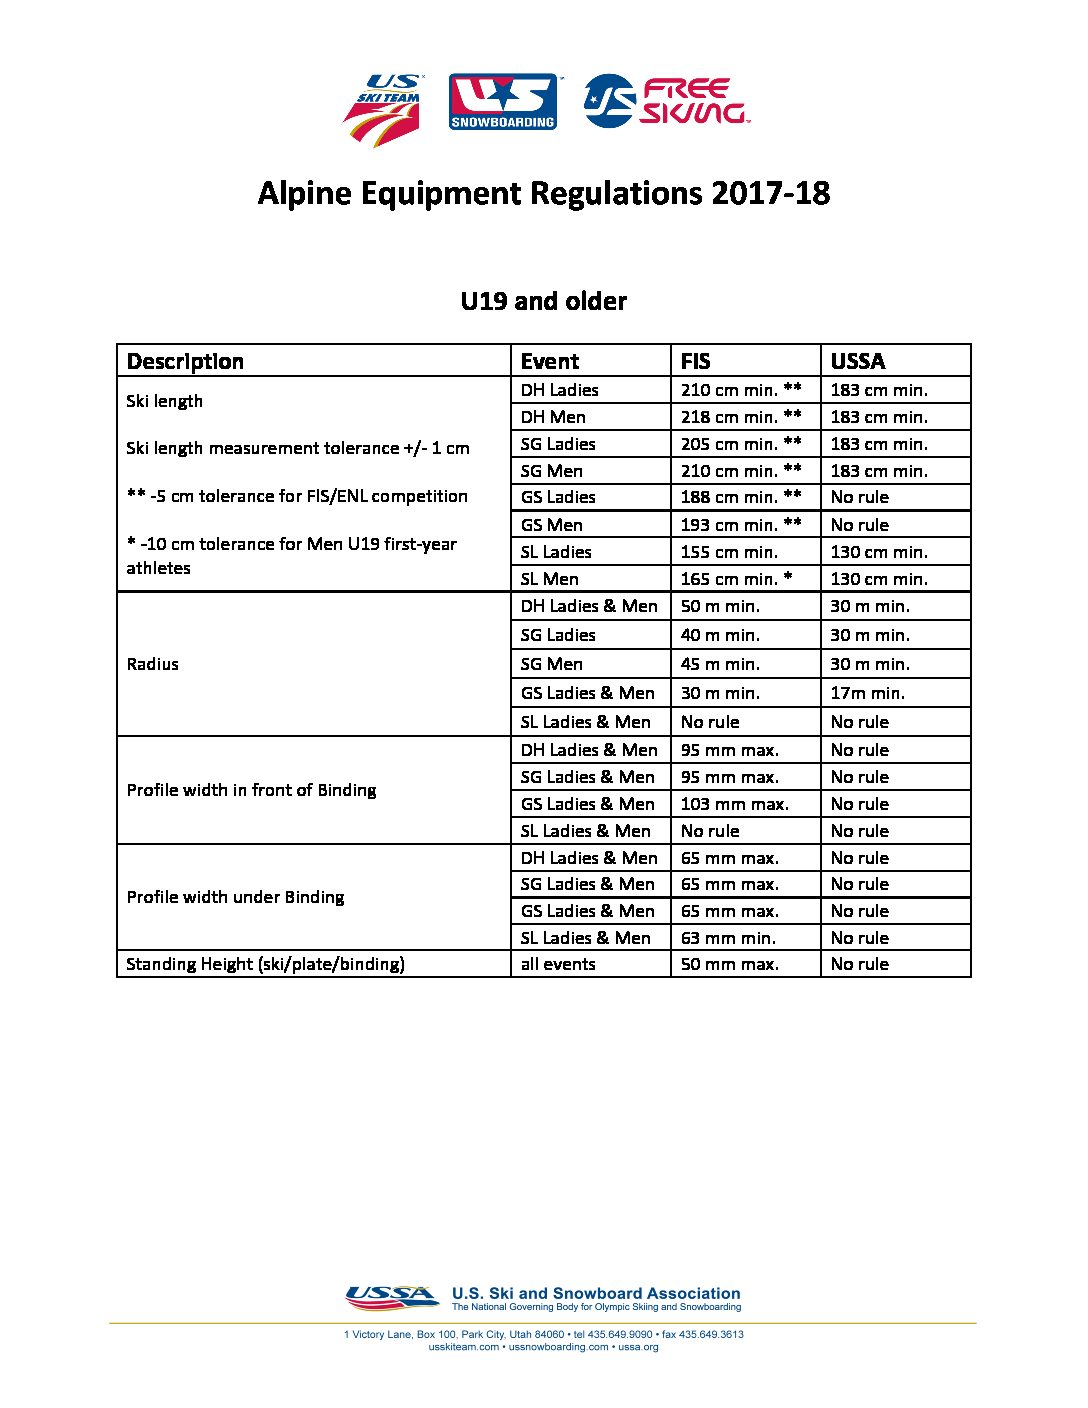 2017-18 Alpine Equipment Regulations are Now Finalized